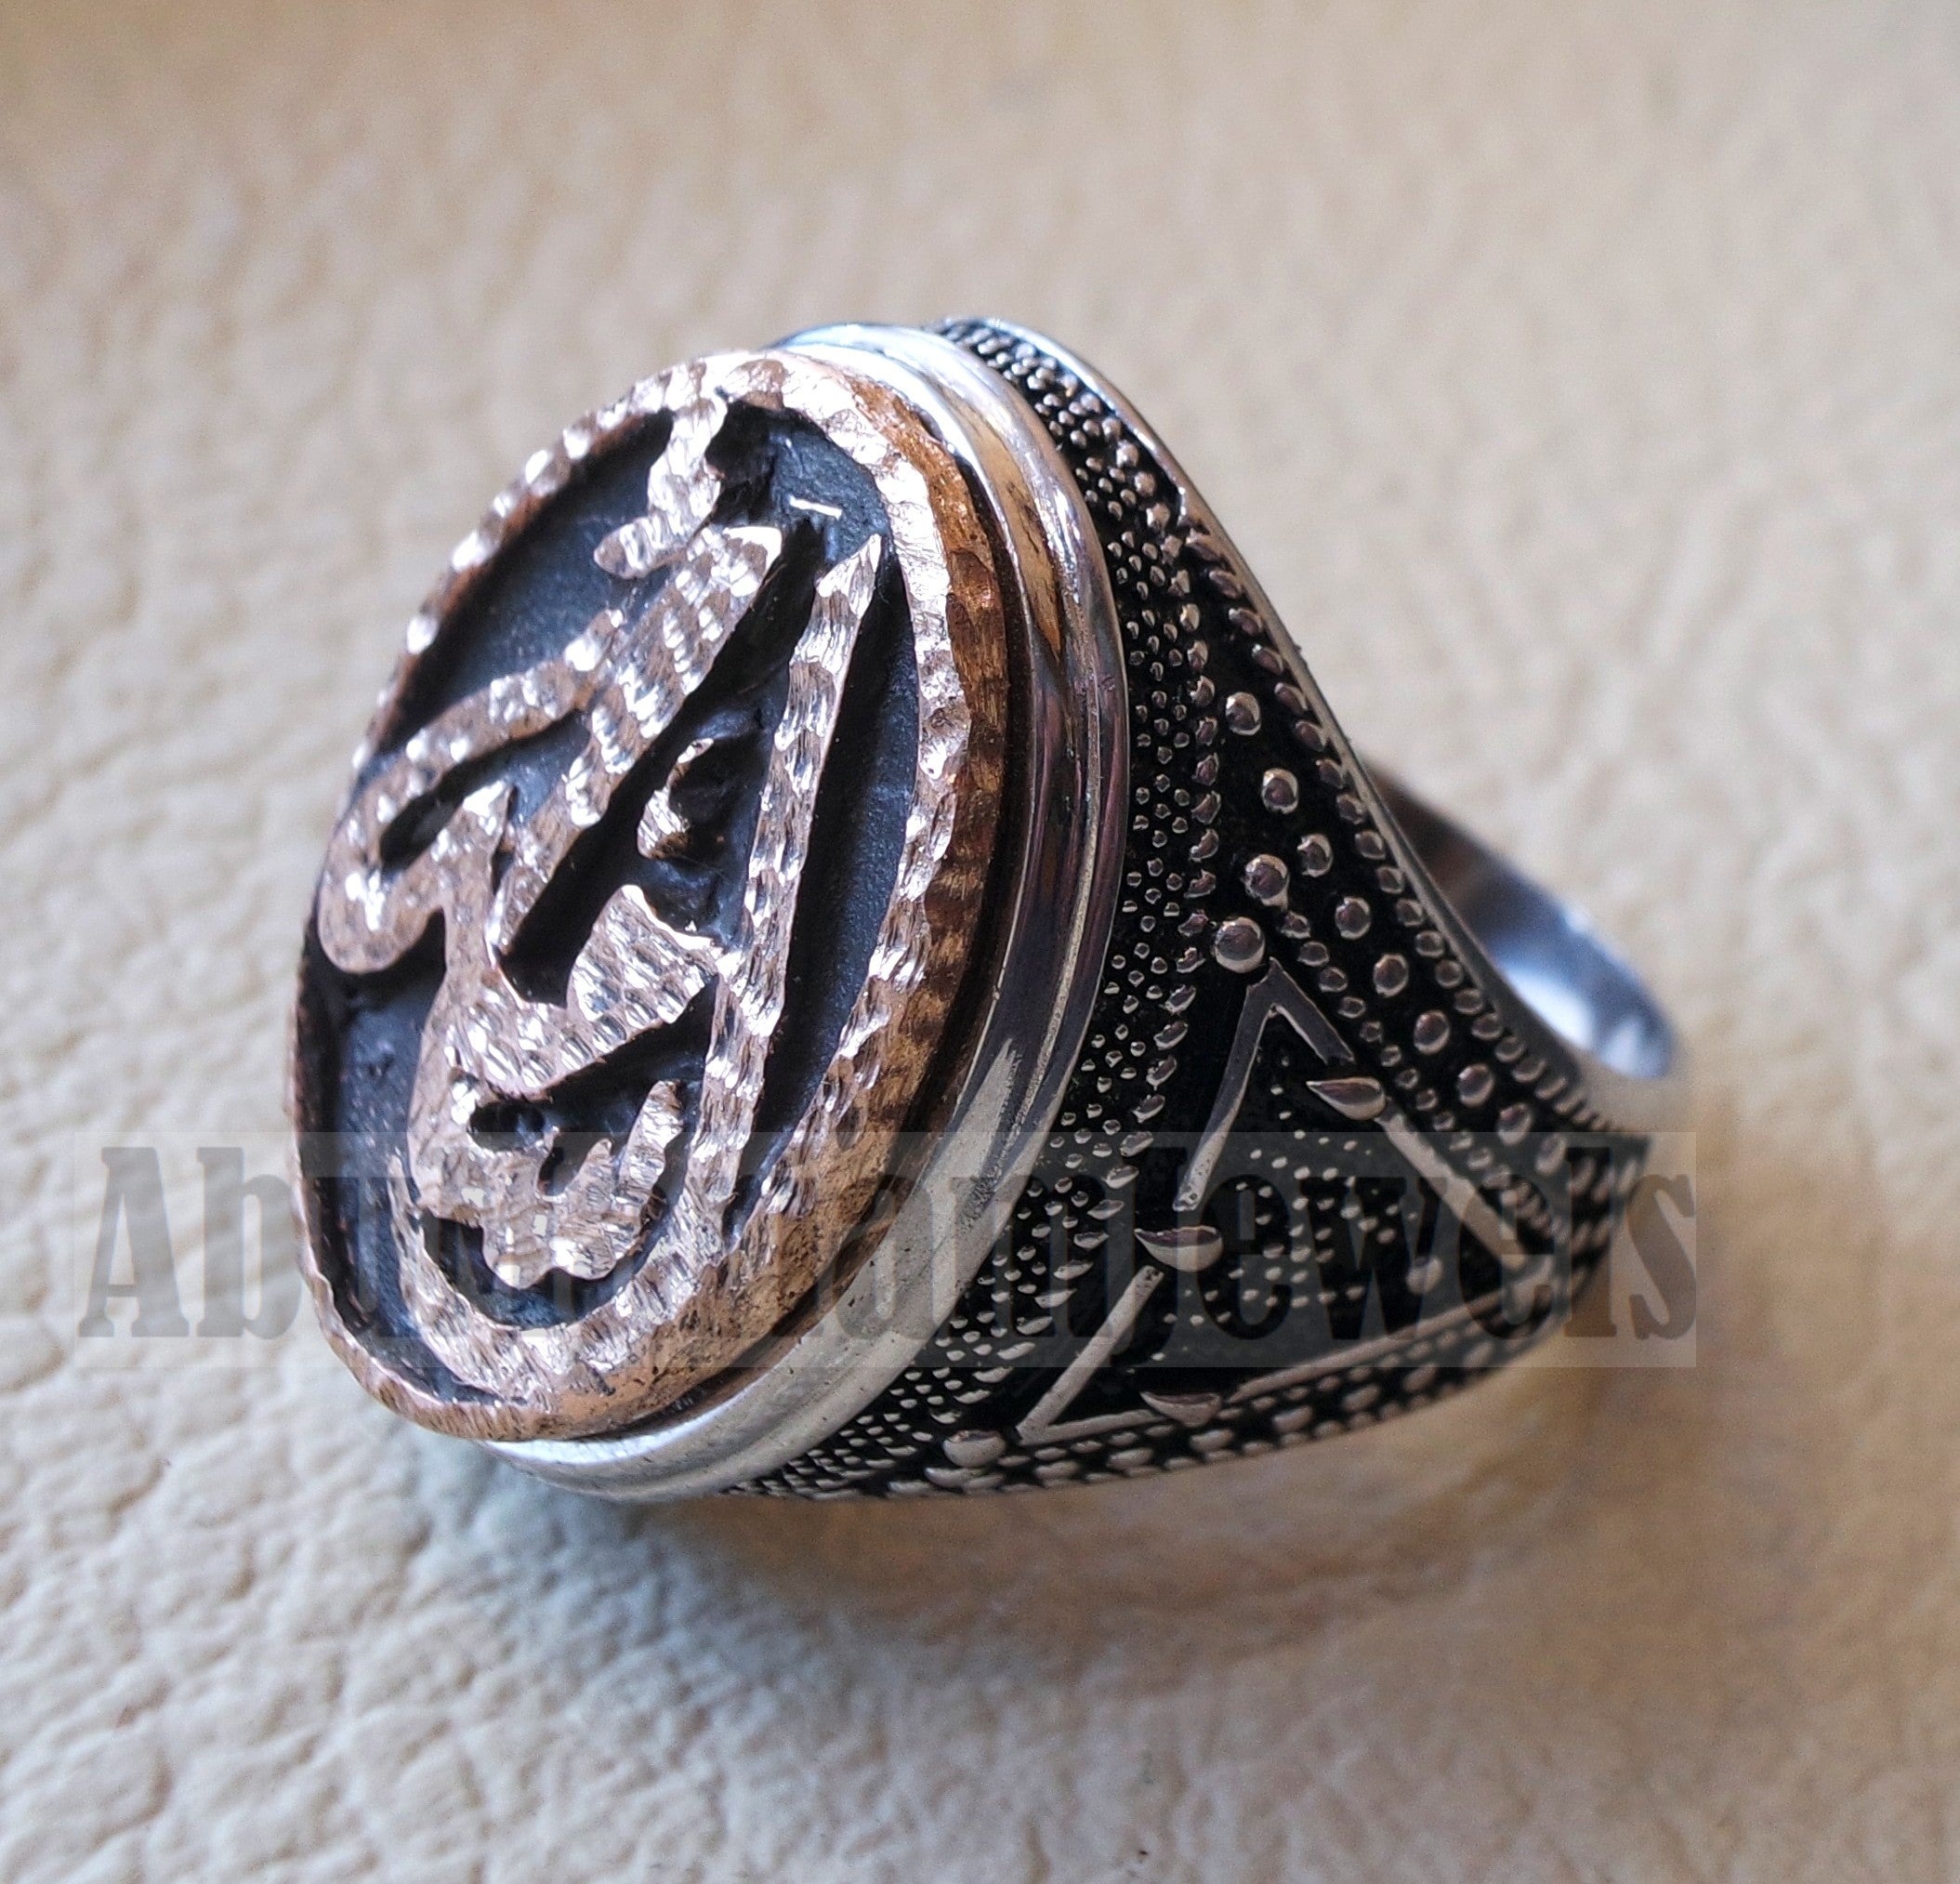 Customized Arabic calligraphy names ring personalized antique jewelry style sterling silver 925 and bronze any size TSB1002 خاتم اسم تفصيل